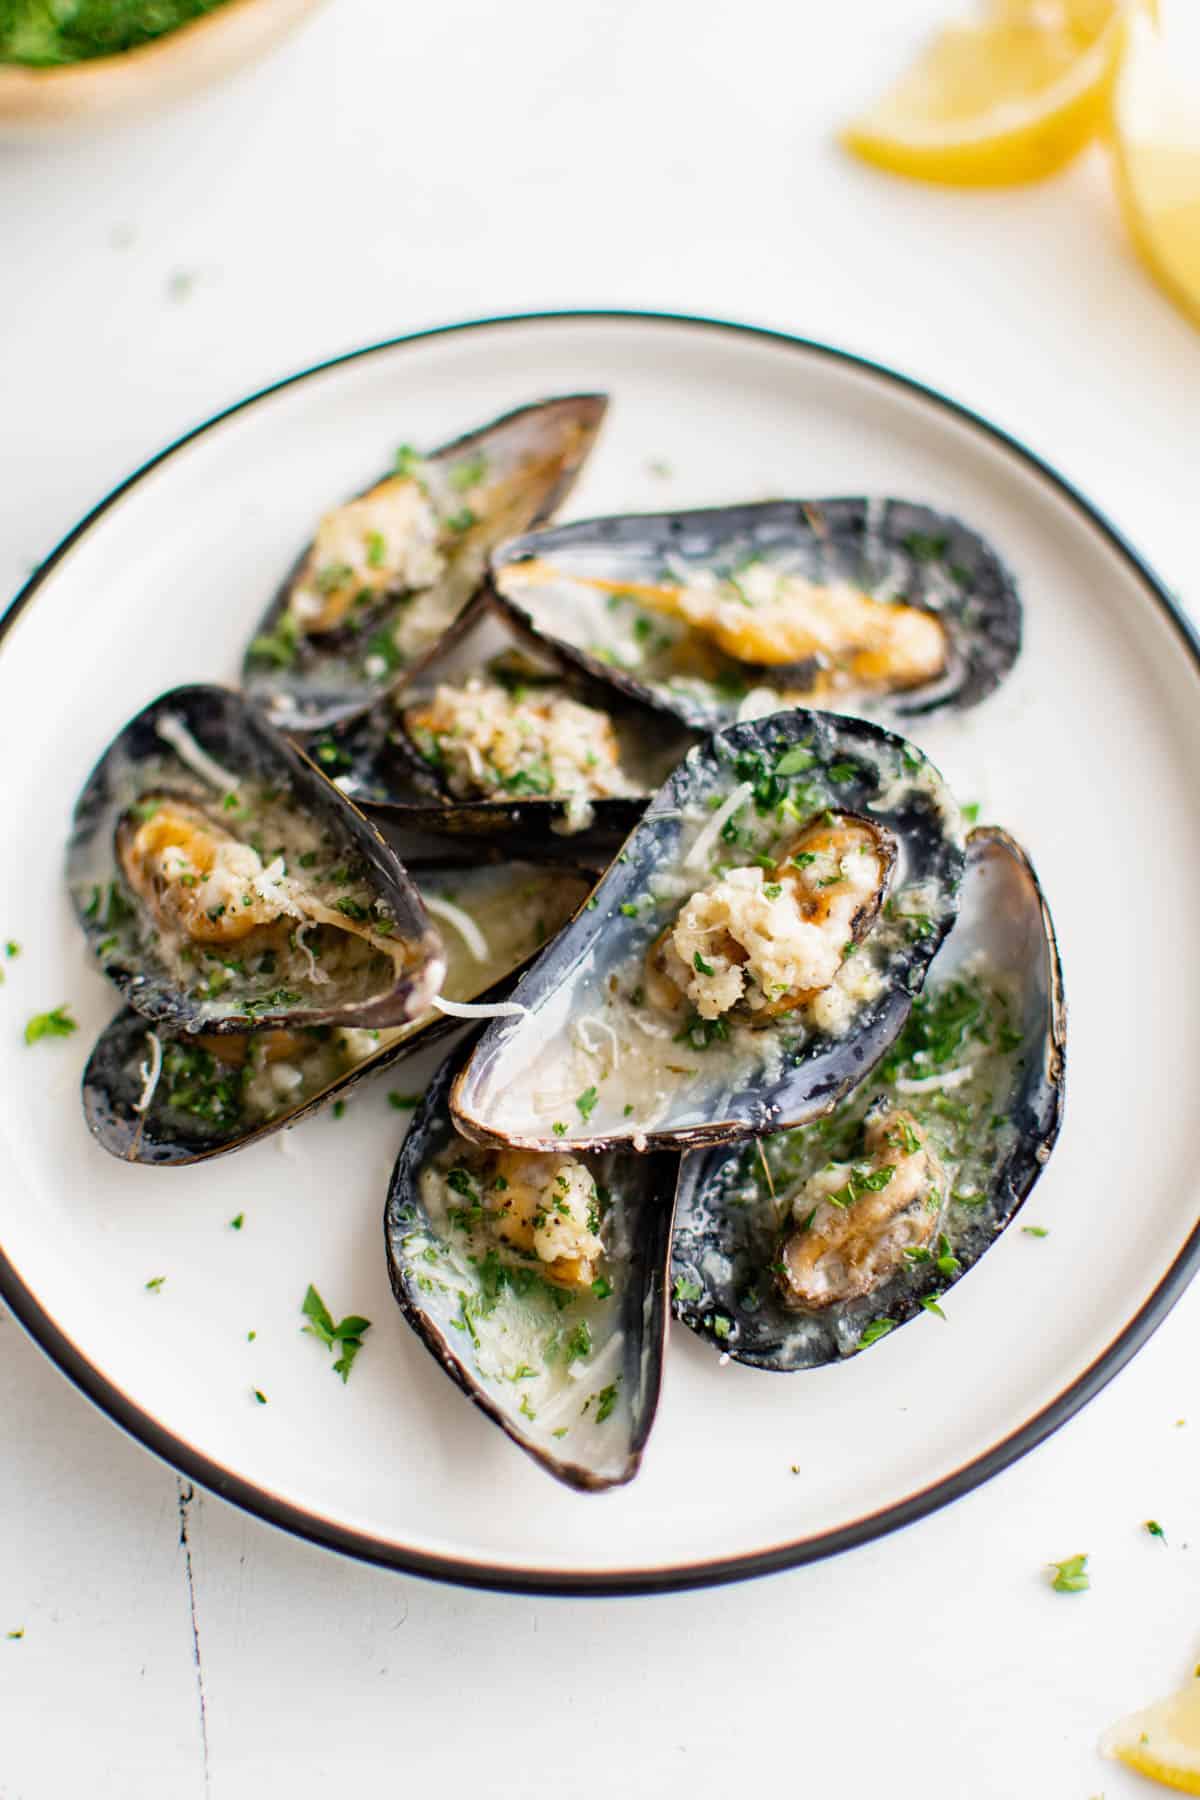 Eight baked mussels in garlic butter on a white plate sitting on a white tabletop for serving. They are garnished with freshly chopped parsley.